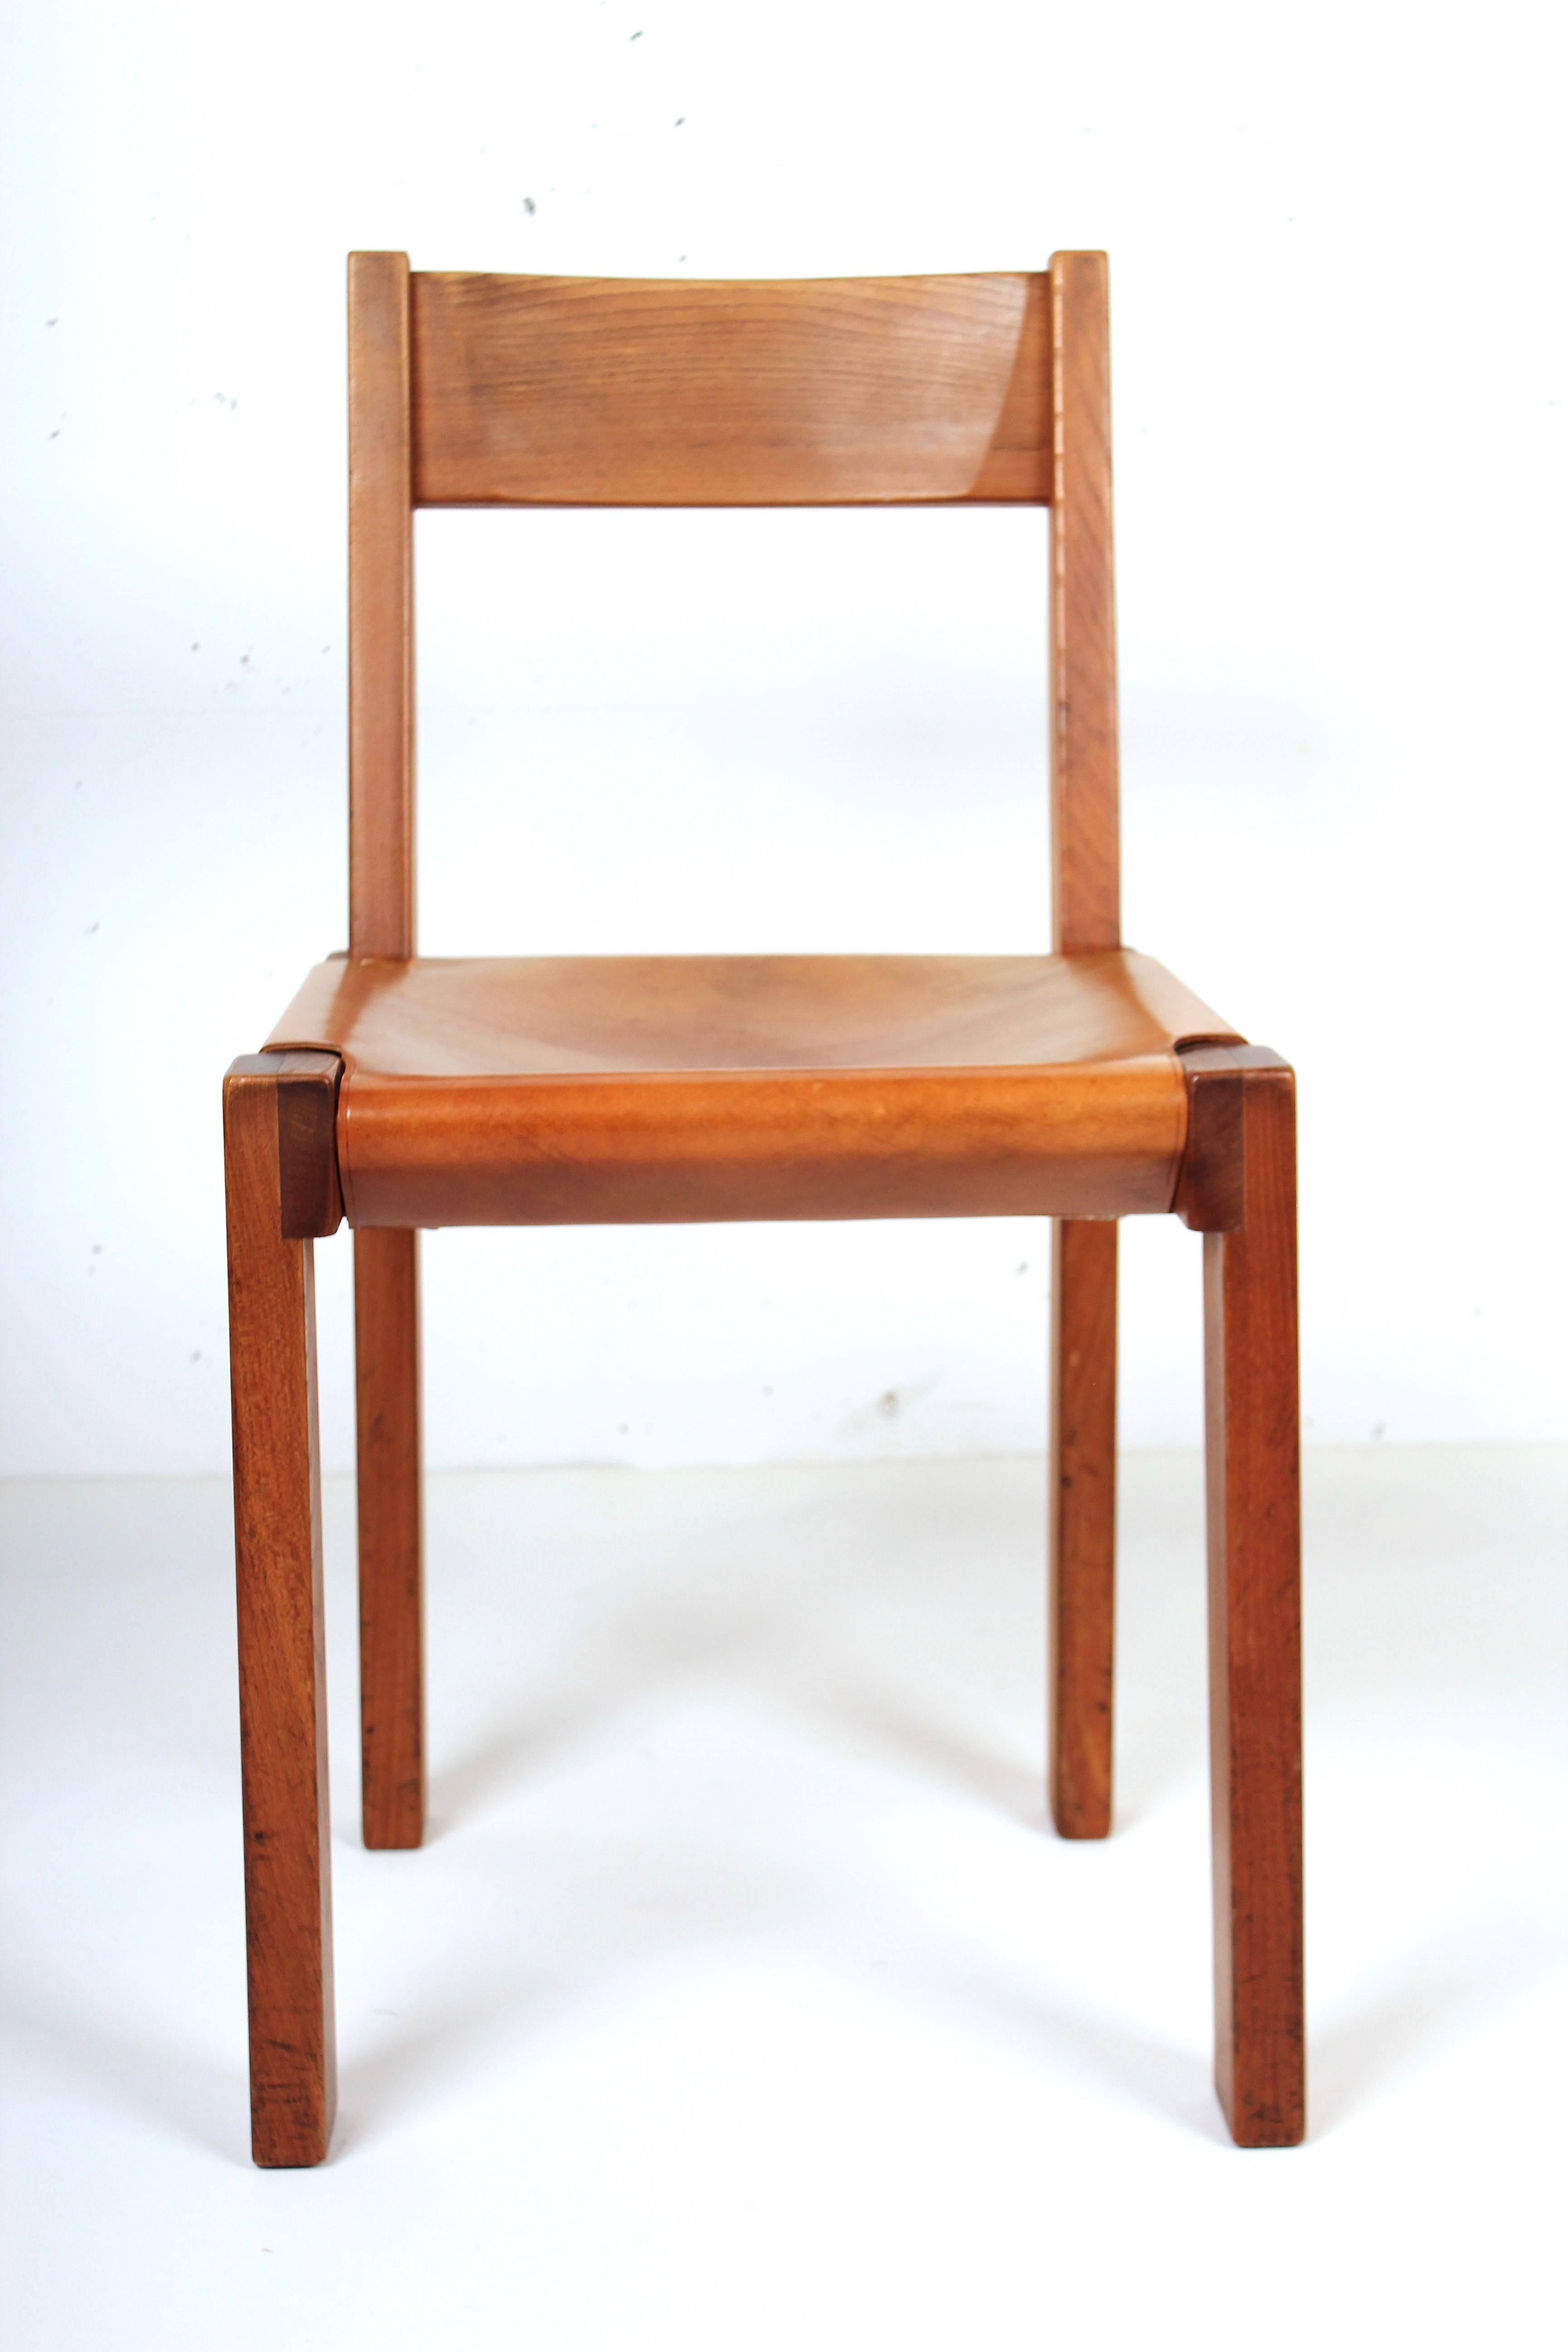 Pierre Chapo Set of Four Elm and Leather S 24 Dining Chairs, France, 1960s For Sale 10